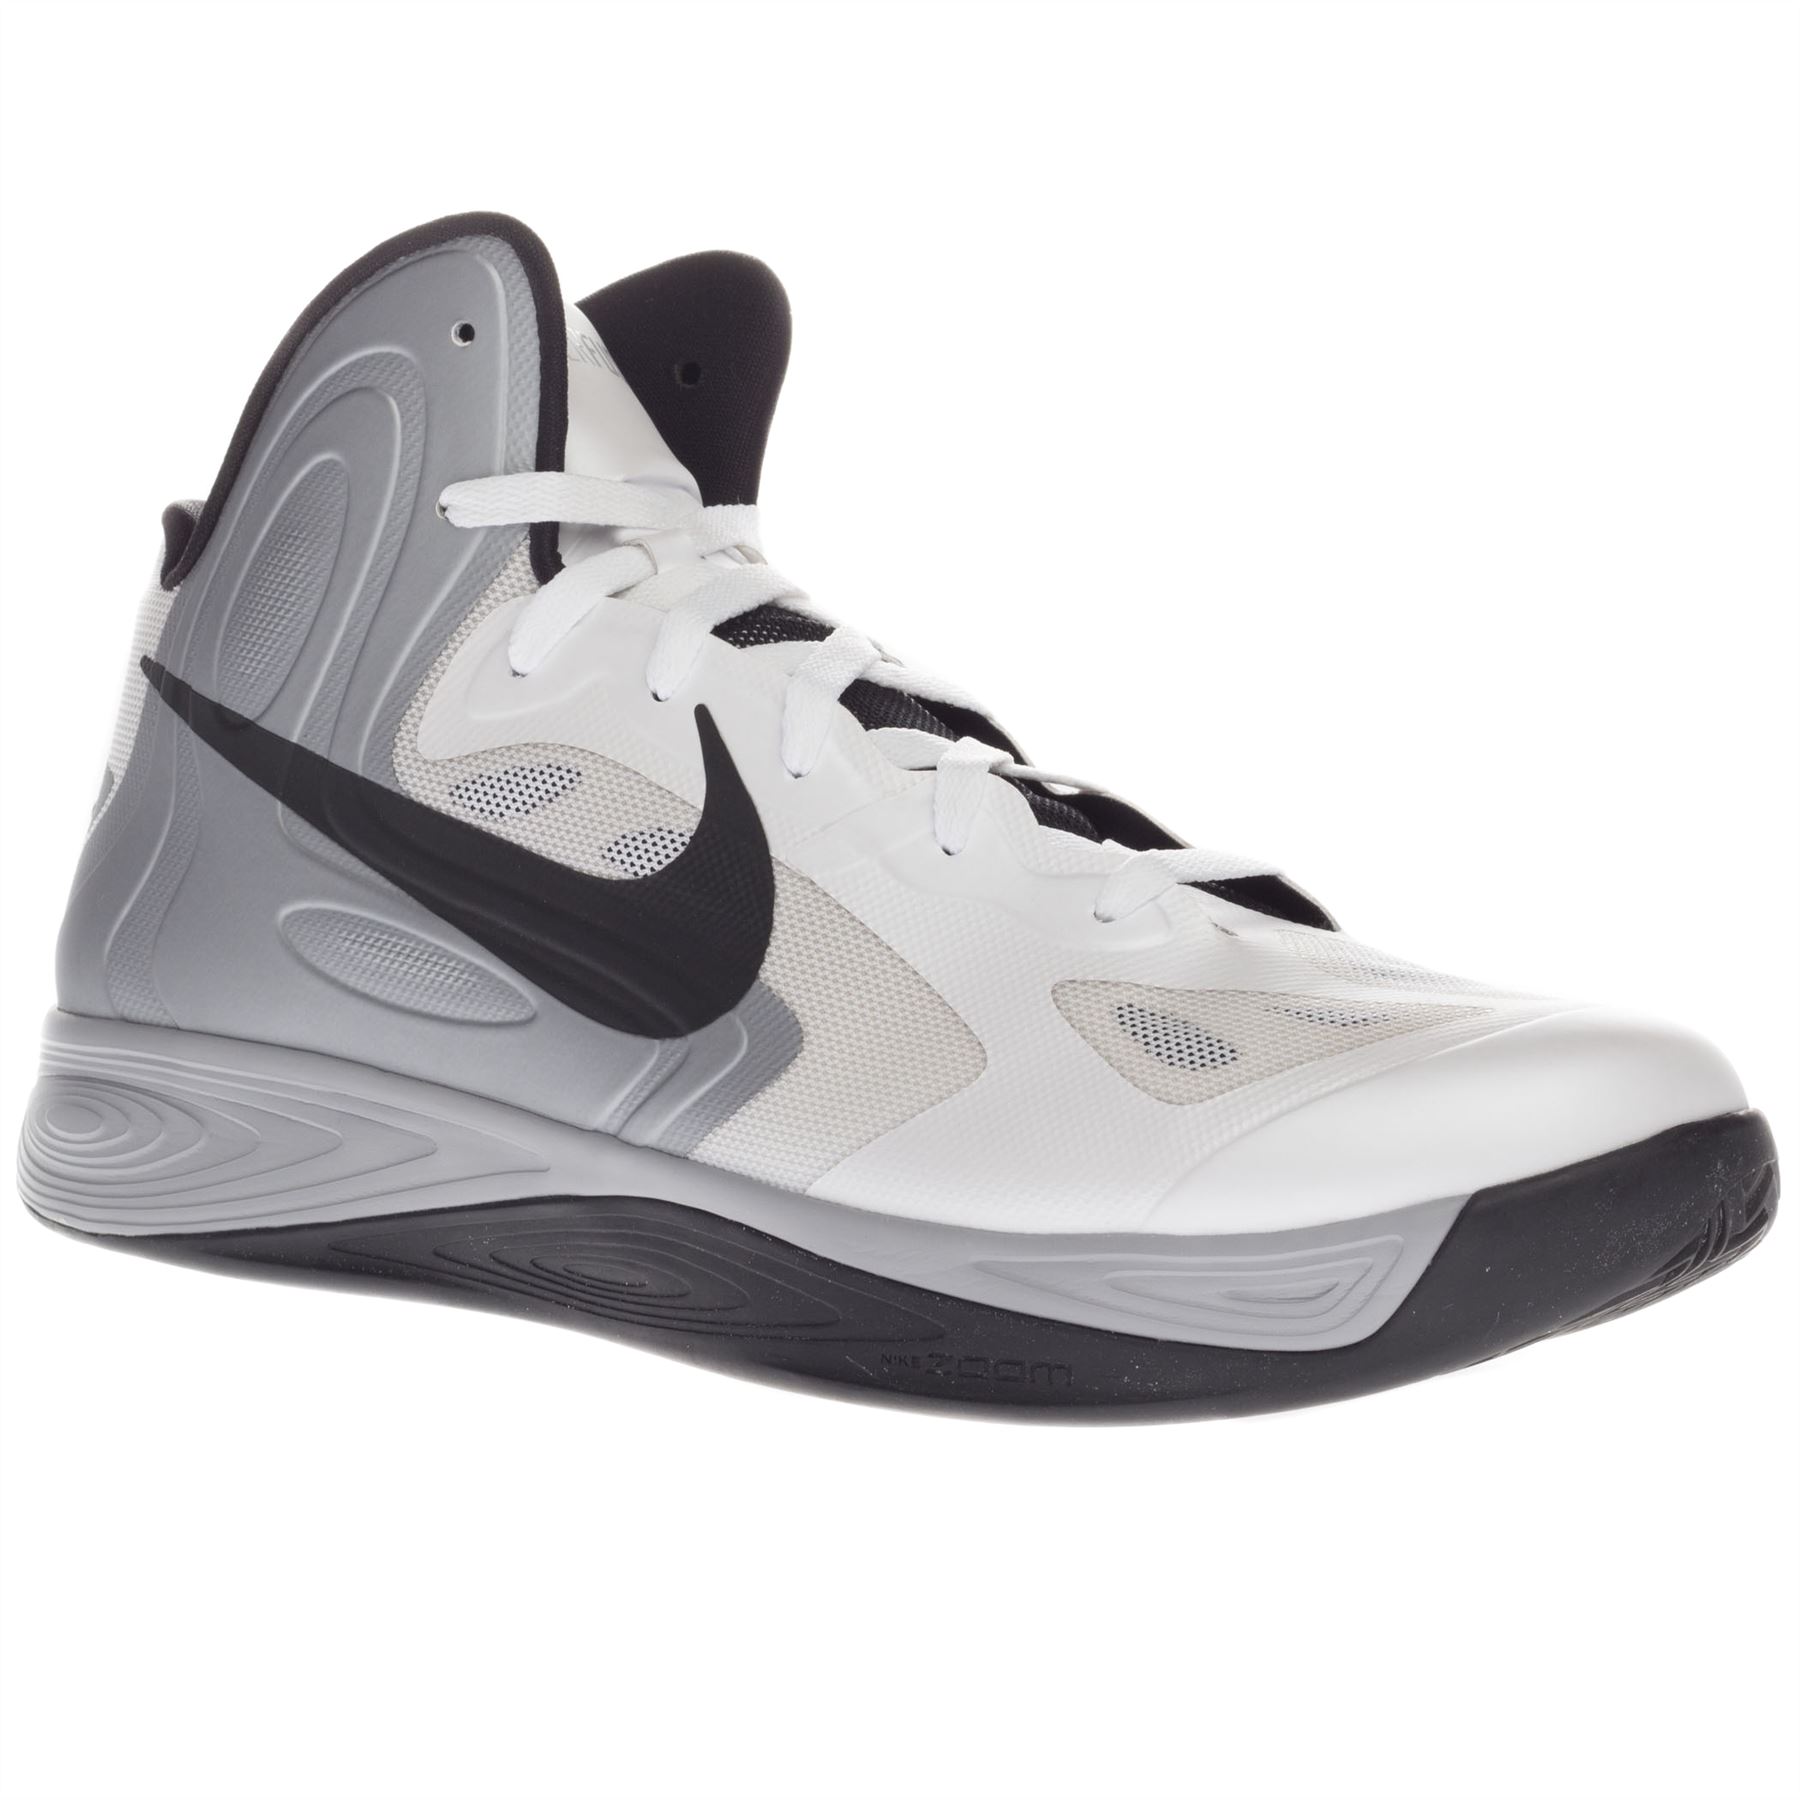 Nike Men's Hyperfuse Hi Top Basketball Sports Running White Trainers